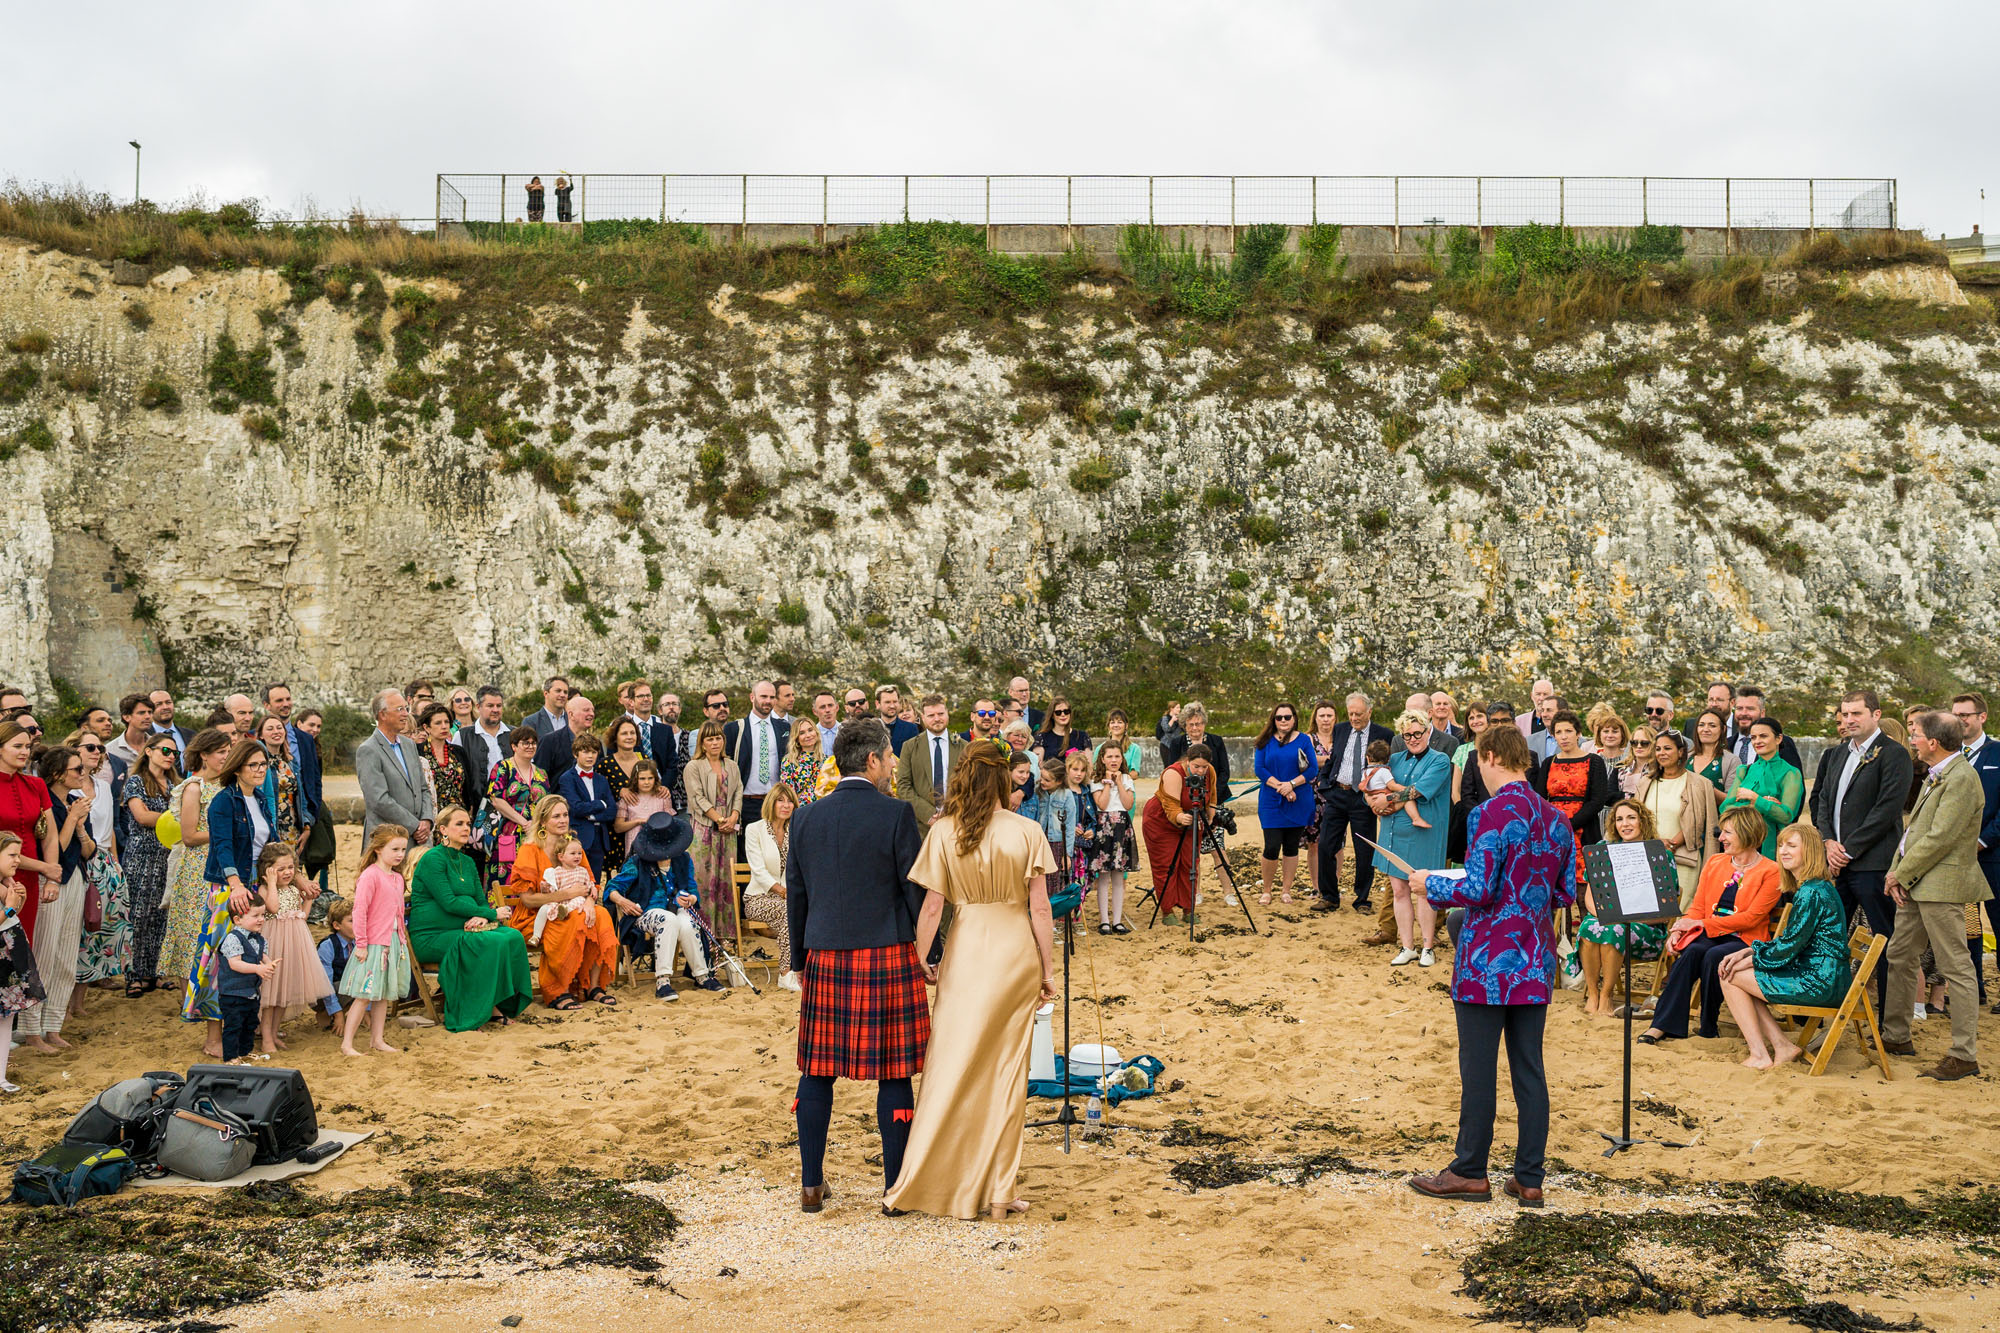 Margate beach wedding for an alternative and very personal celebration. Kent wedding photography by Benjamin Toms.